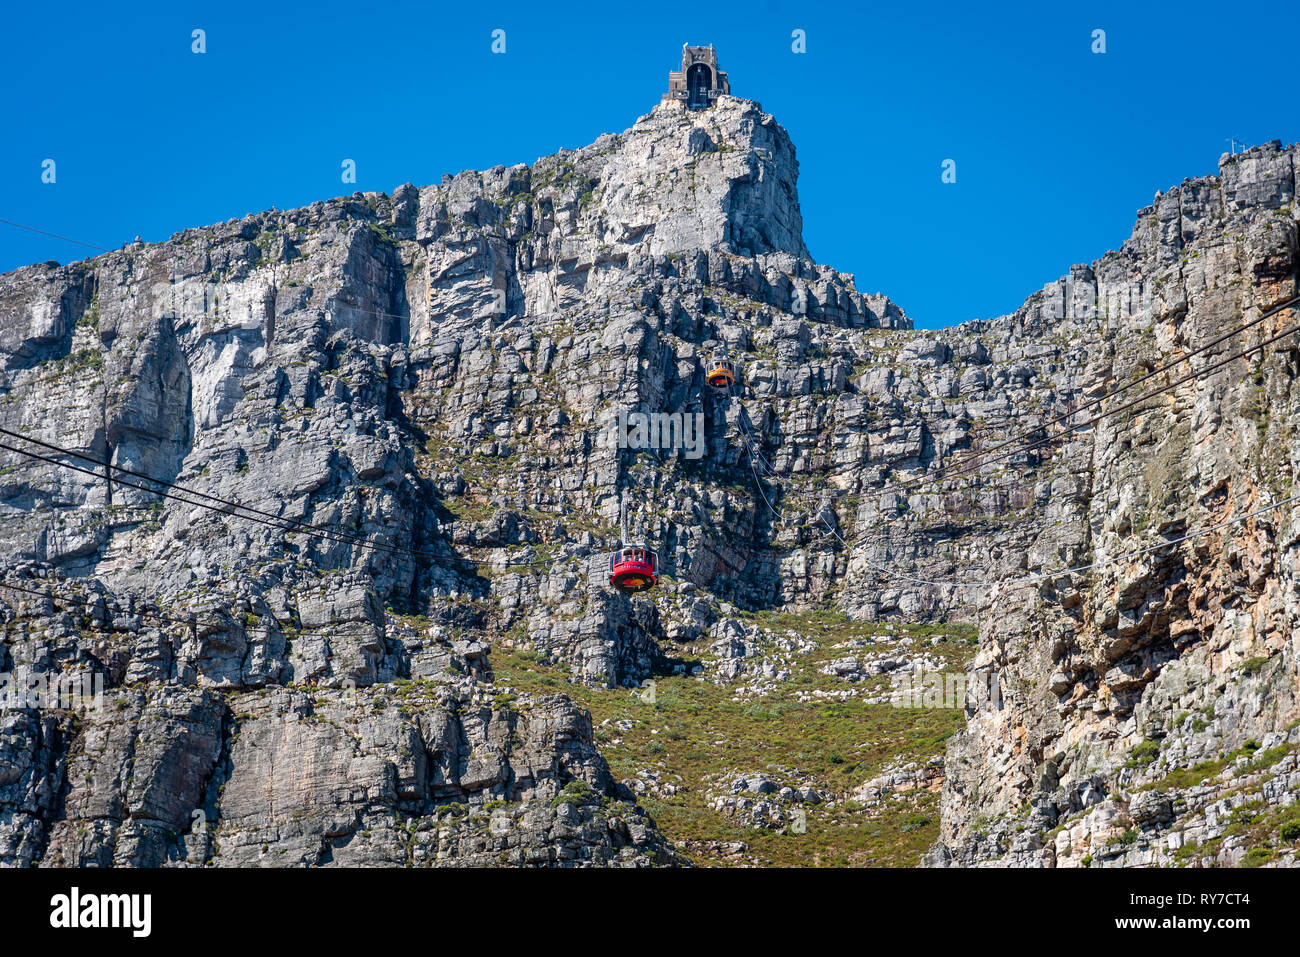 The view from Table Mountain, Cape Town, South Africa Stock Photo